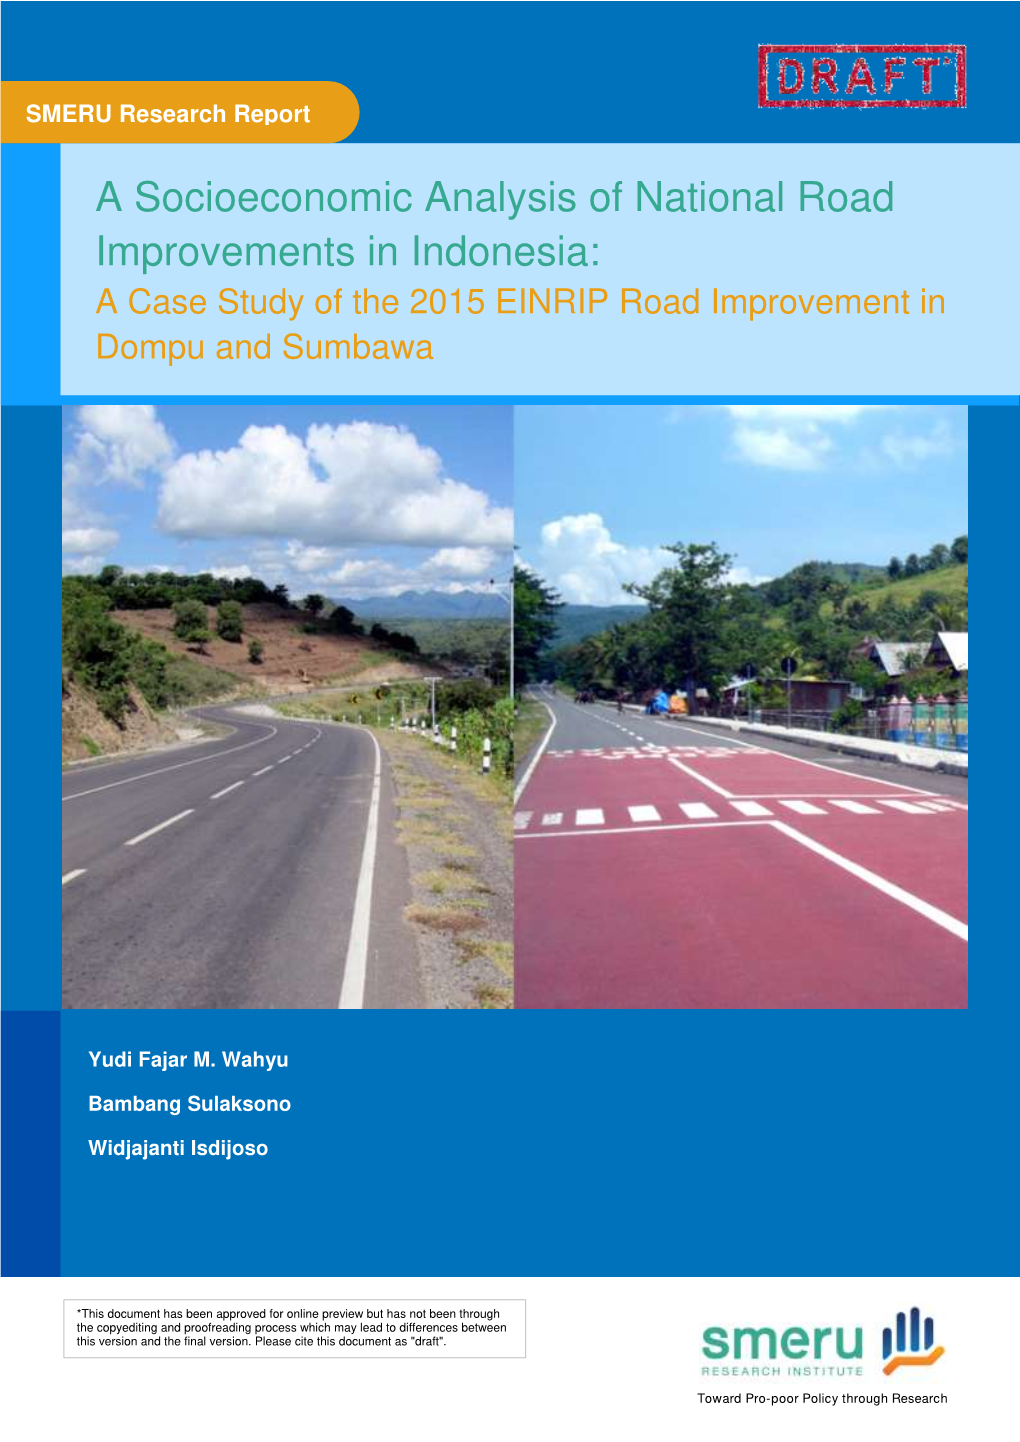 A Socioeconomic Analysis of National Road Improvements in Indonesia: a Case Study of the 2015 EINRIP Road Improvement in Dompu and Sumbawa